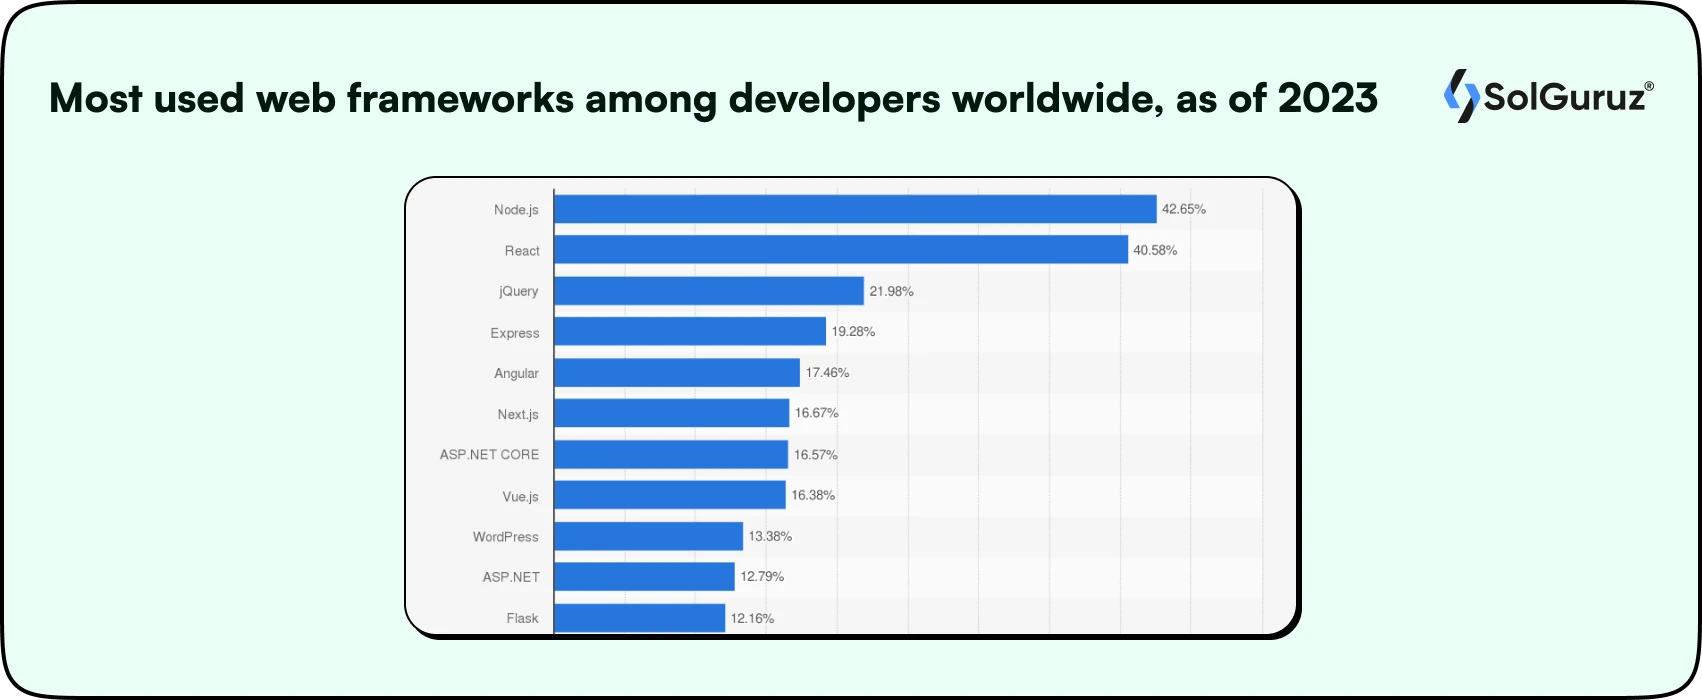 Most used web frameworks among developers worldwide, as of 2023